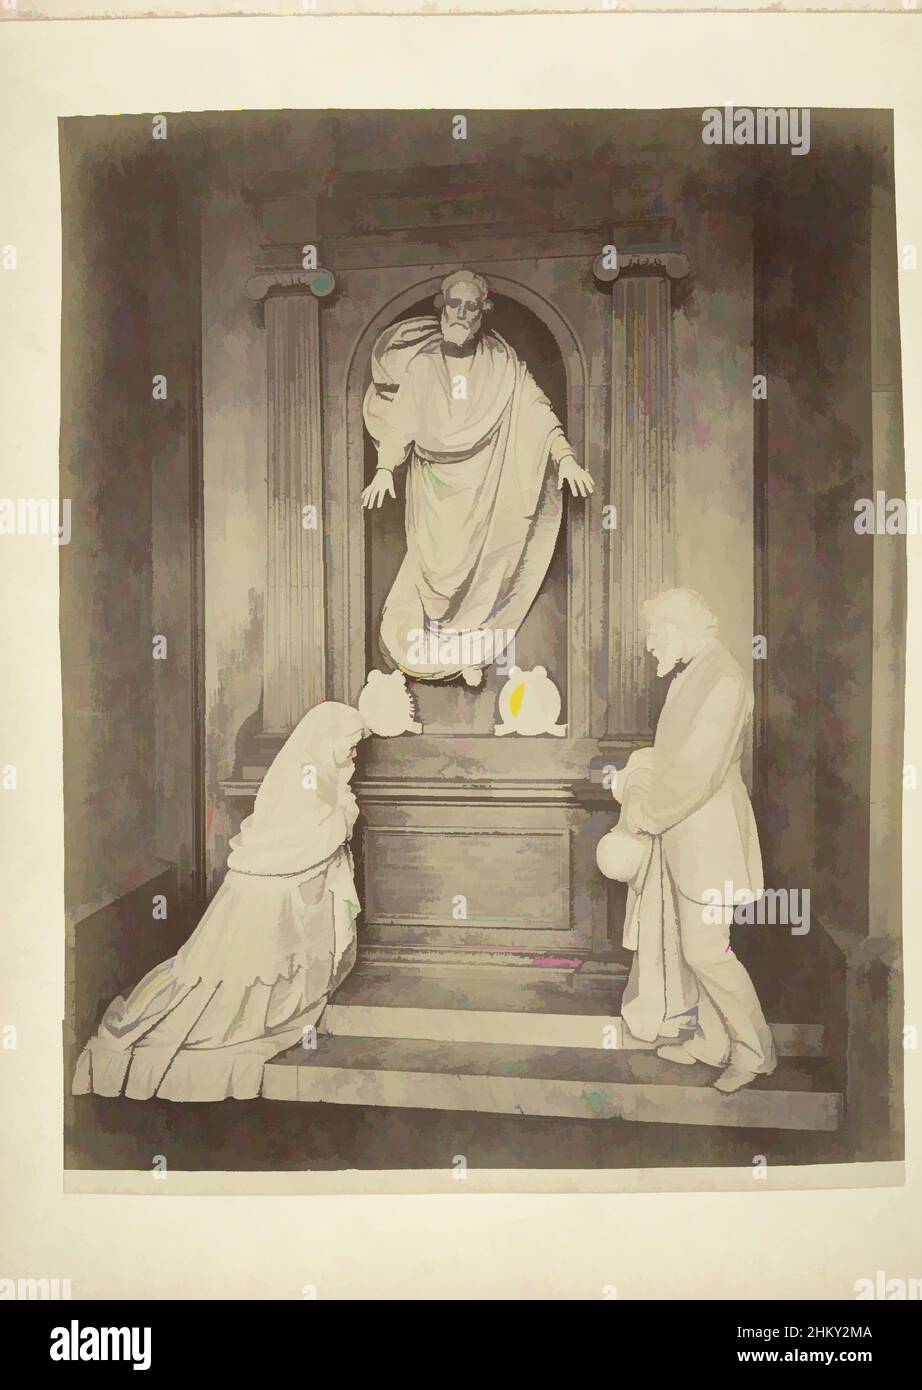 Art inspired by Tomb monument in the Campo Santo of Genoa, A man and woman at the grave of their deceased child, above the grave the lord watches. Tomb monument of Guiseppe Benedetto Badaracco, made by Moreno., Alfredo Noack, (rejected attribution), Genua, c. 1875, photographic support, Classic works modernized by Artotop with a splash of modernity. Shapes, color and value, eye-catching visual impact on art. Emotions through freedom of artworks in a contemporary way. A timeless message pursuing a wildly creative new direction. Artists turning to the digital medium and creating the Artotop NFT Stock Photo